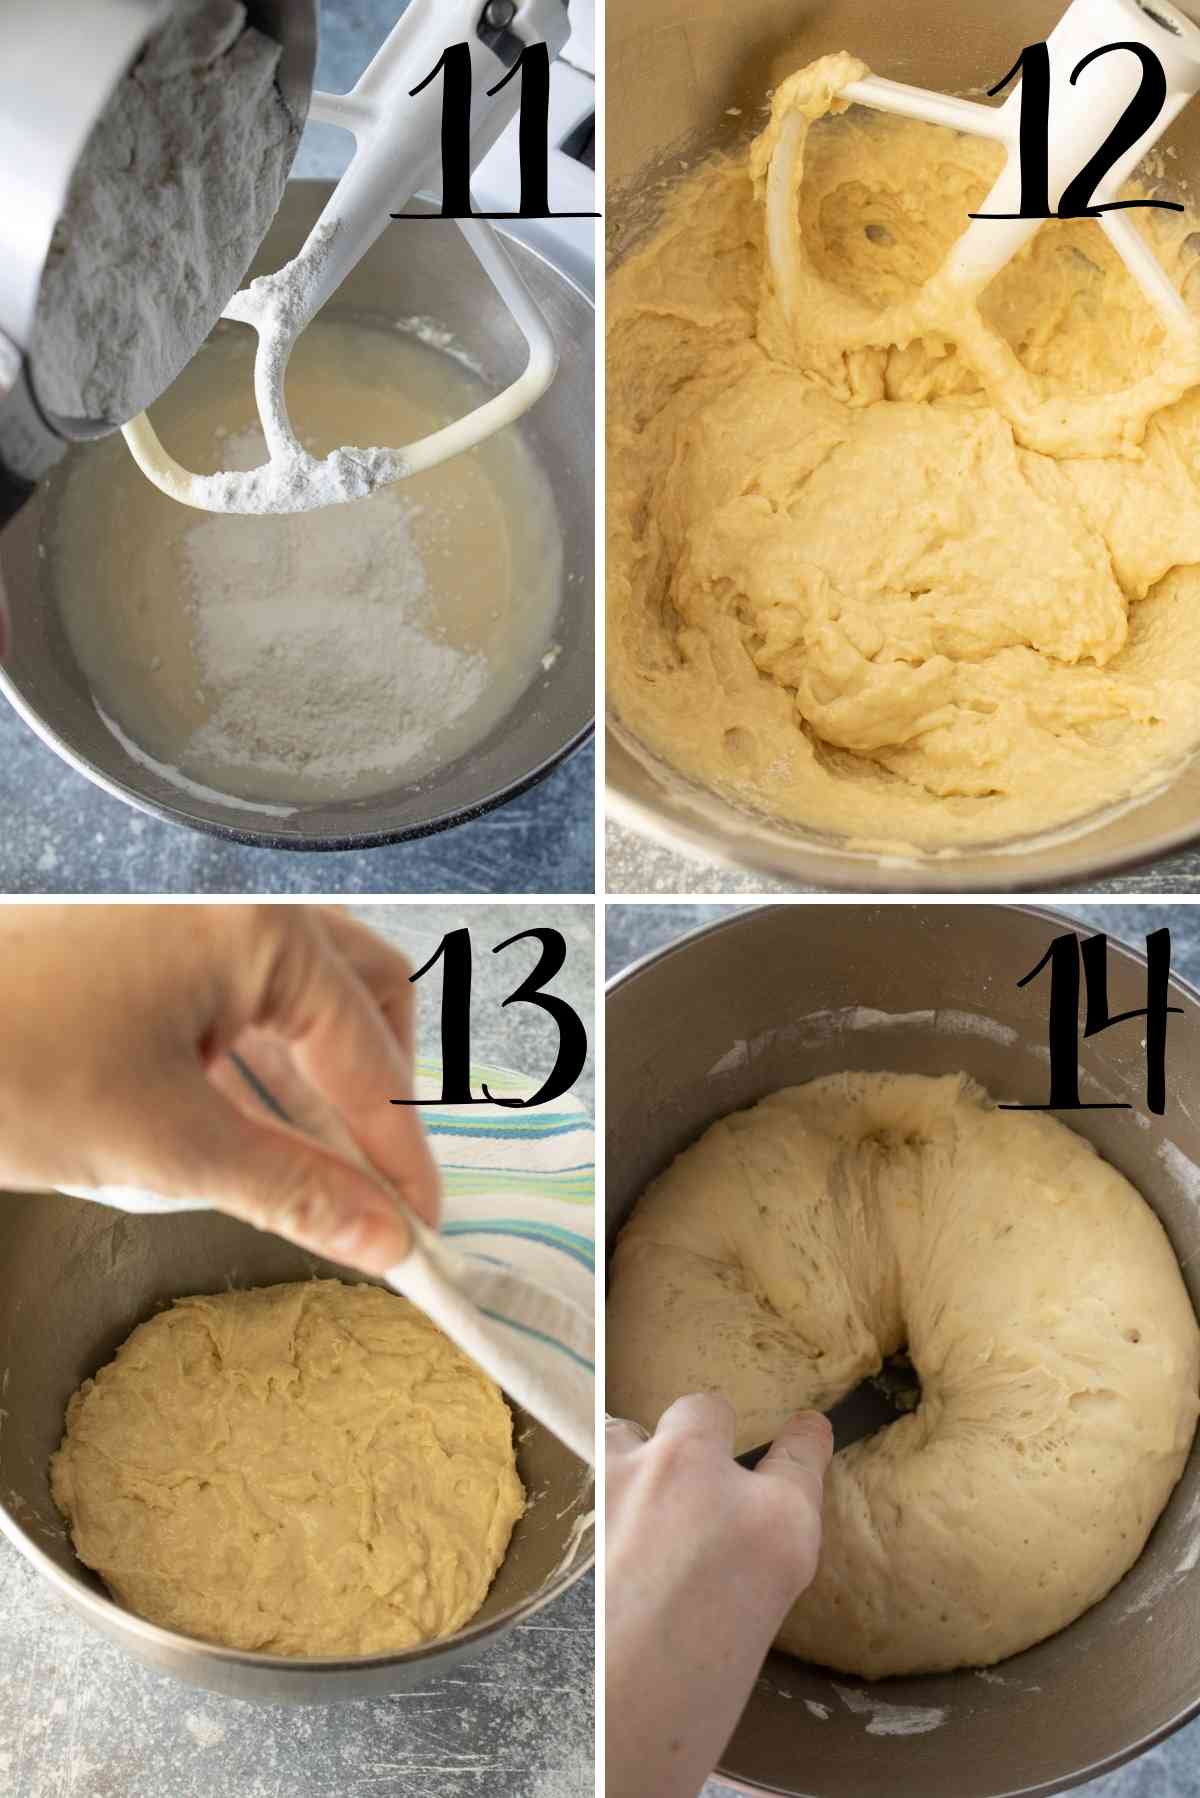 Let dough rise in a warm environment!